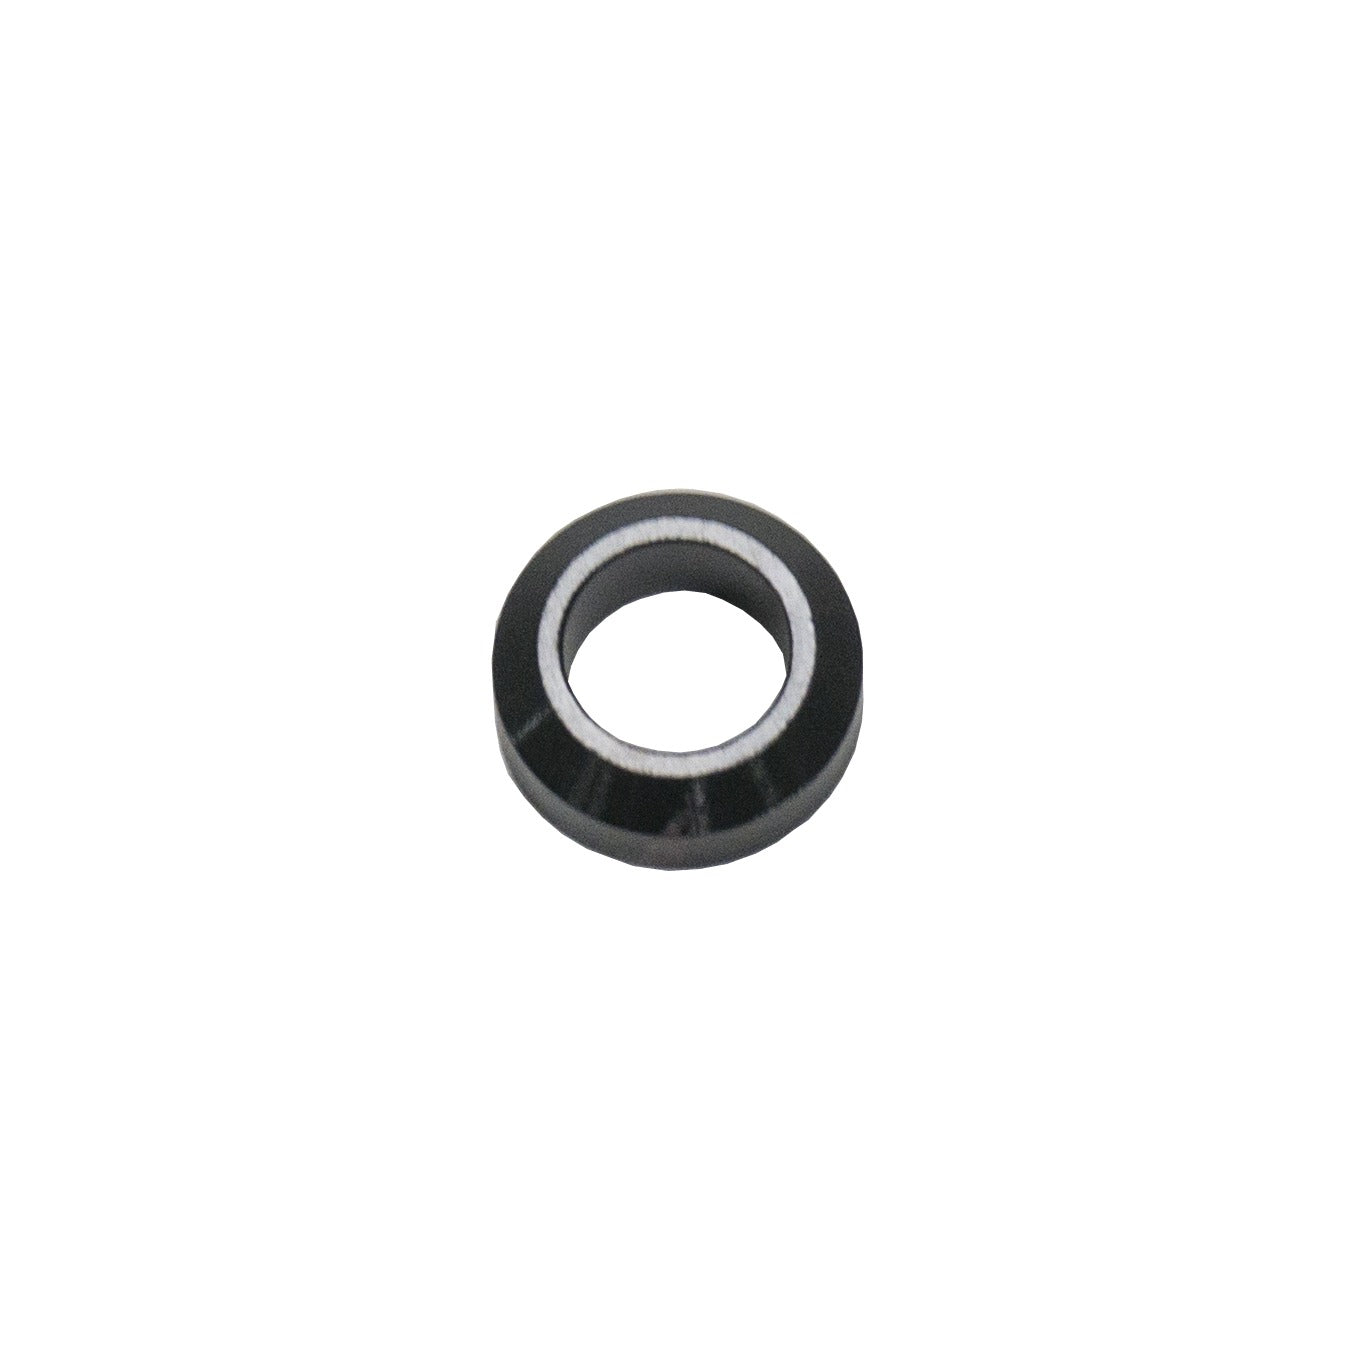 Replacement Thru Axle Spacer for Syntace Axles - Burley